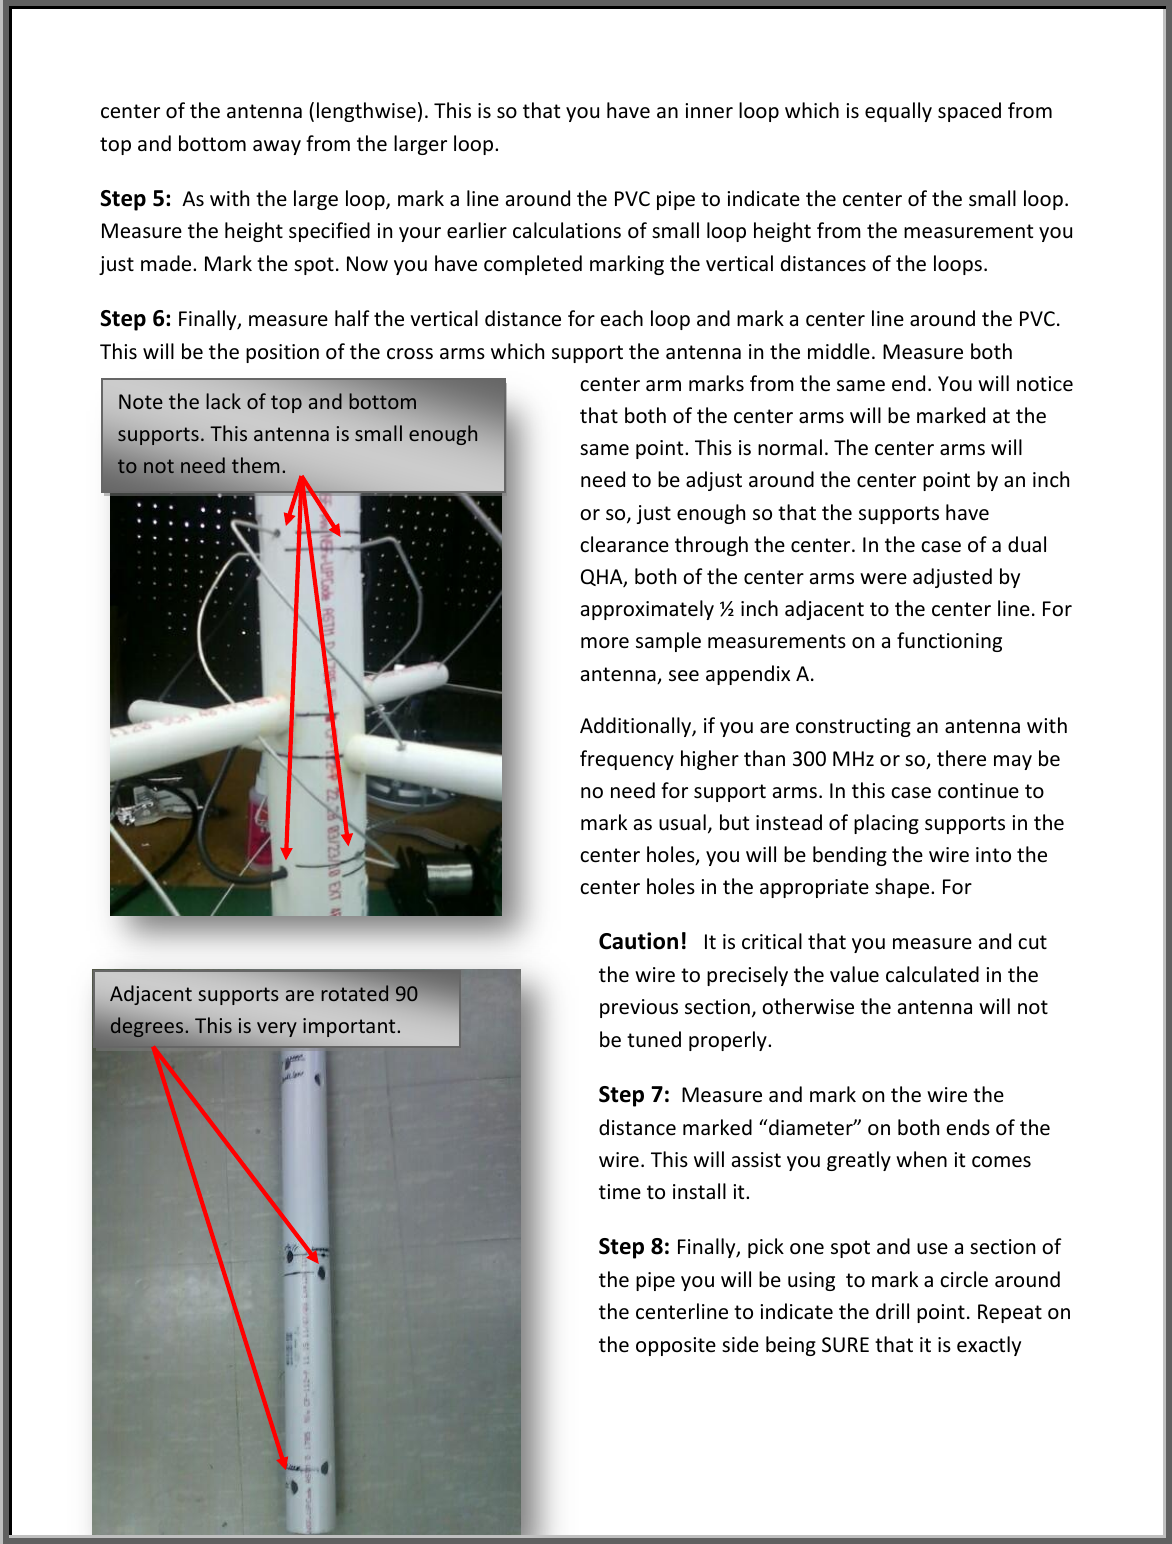 Page 7 of 11 - Building QFH Antenna Guide